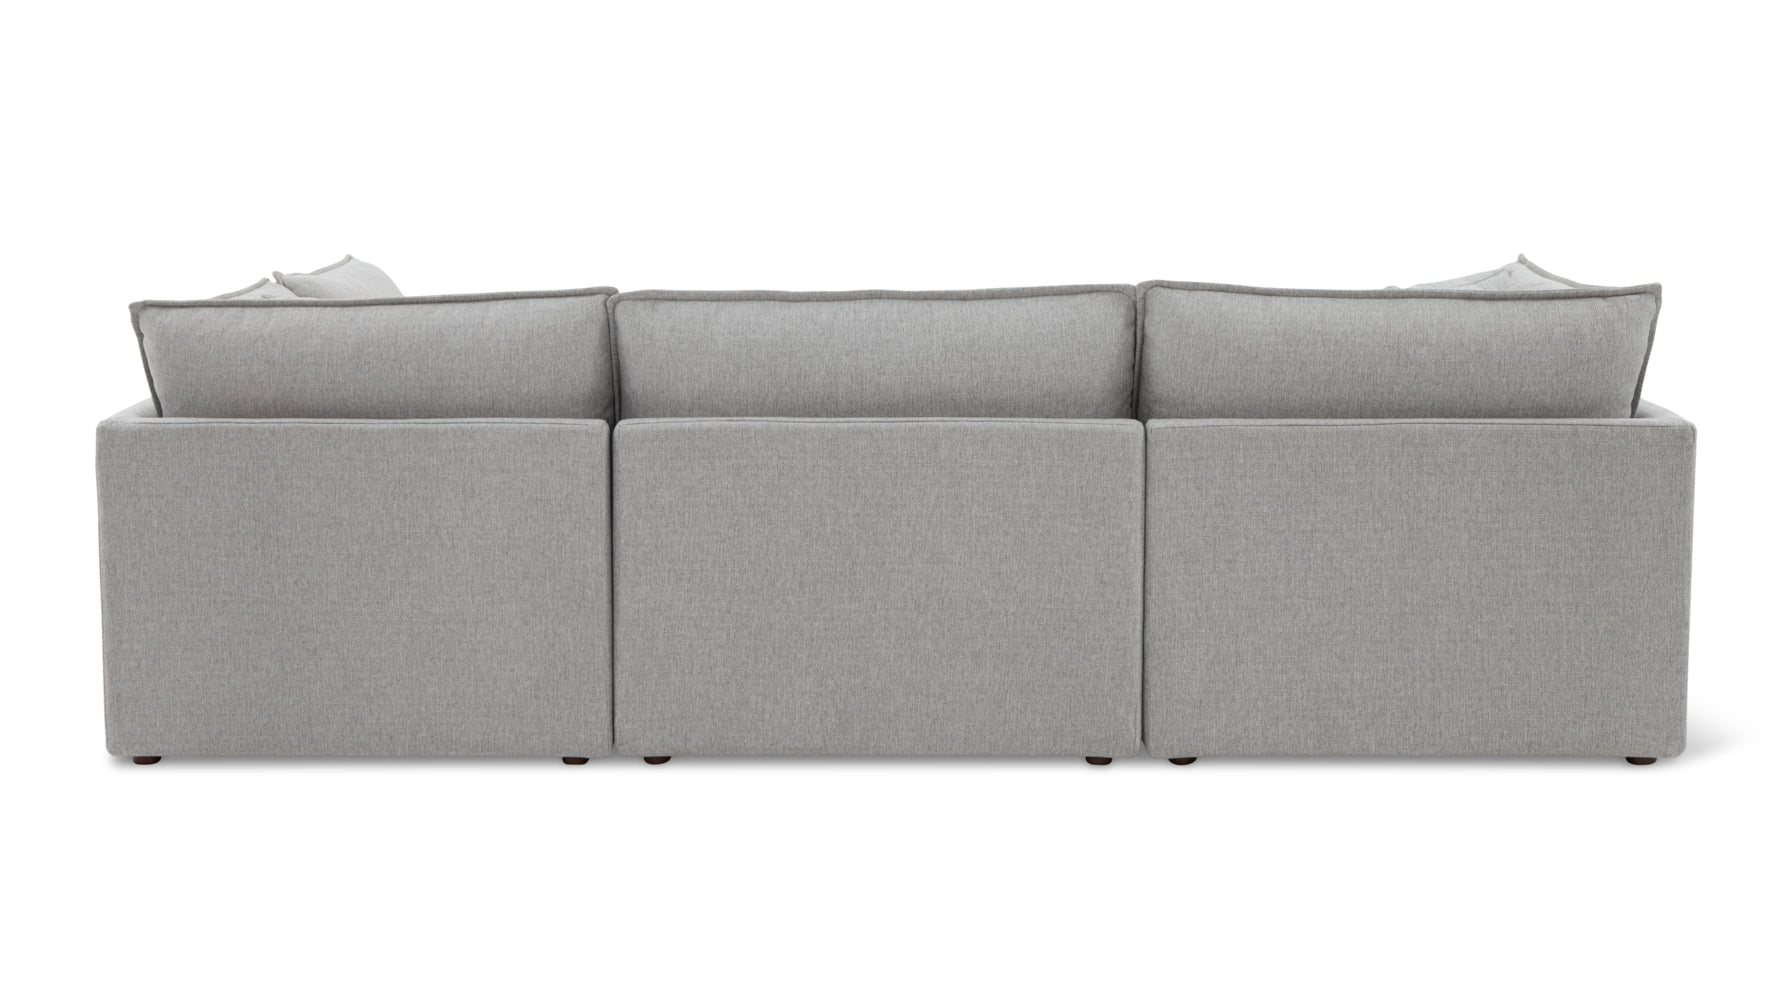 Chill Time 5-Piece Modular Sectional, Heather - Image 4